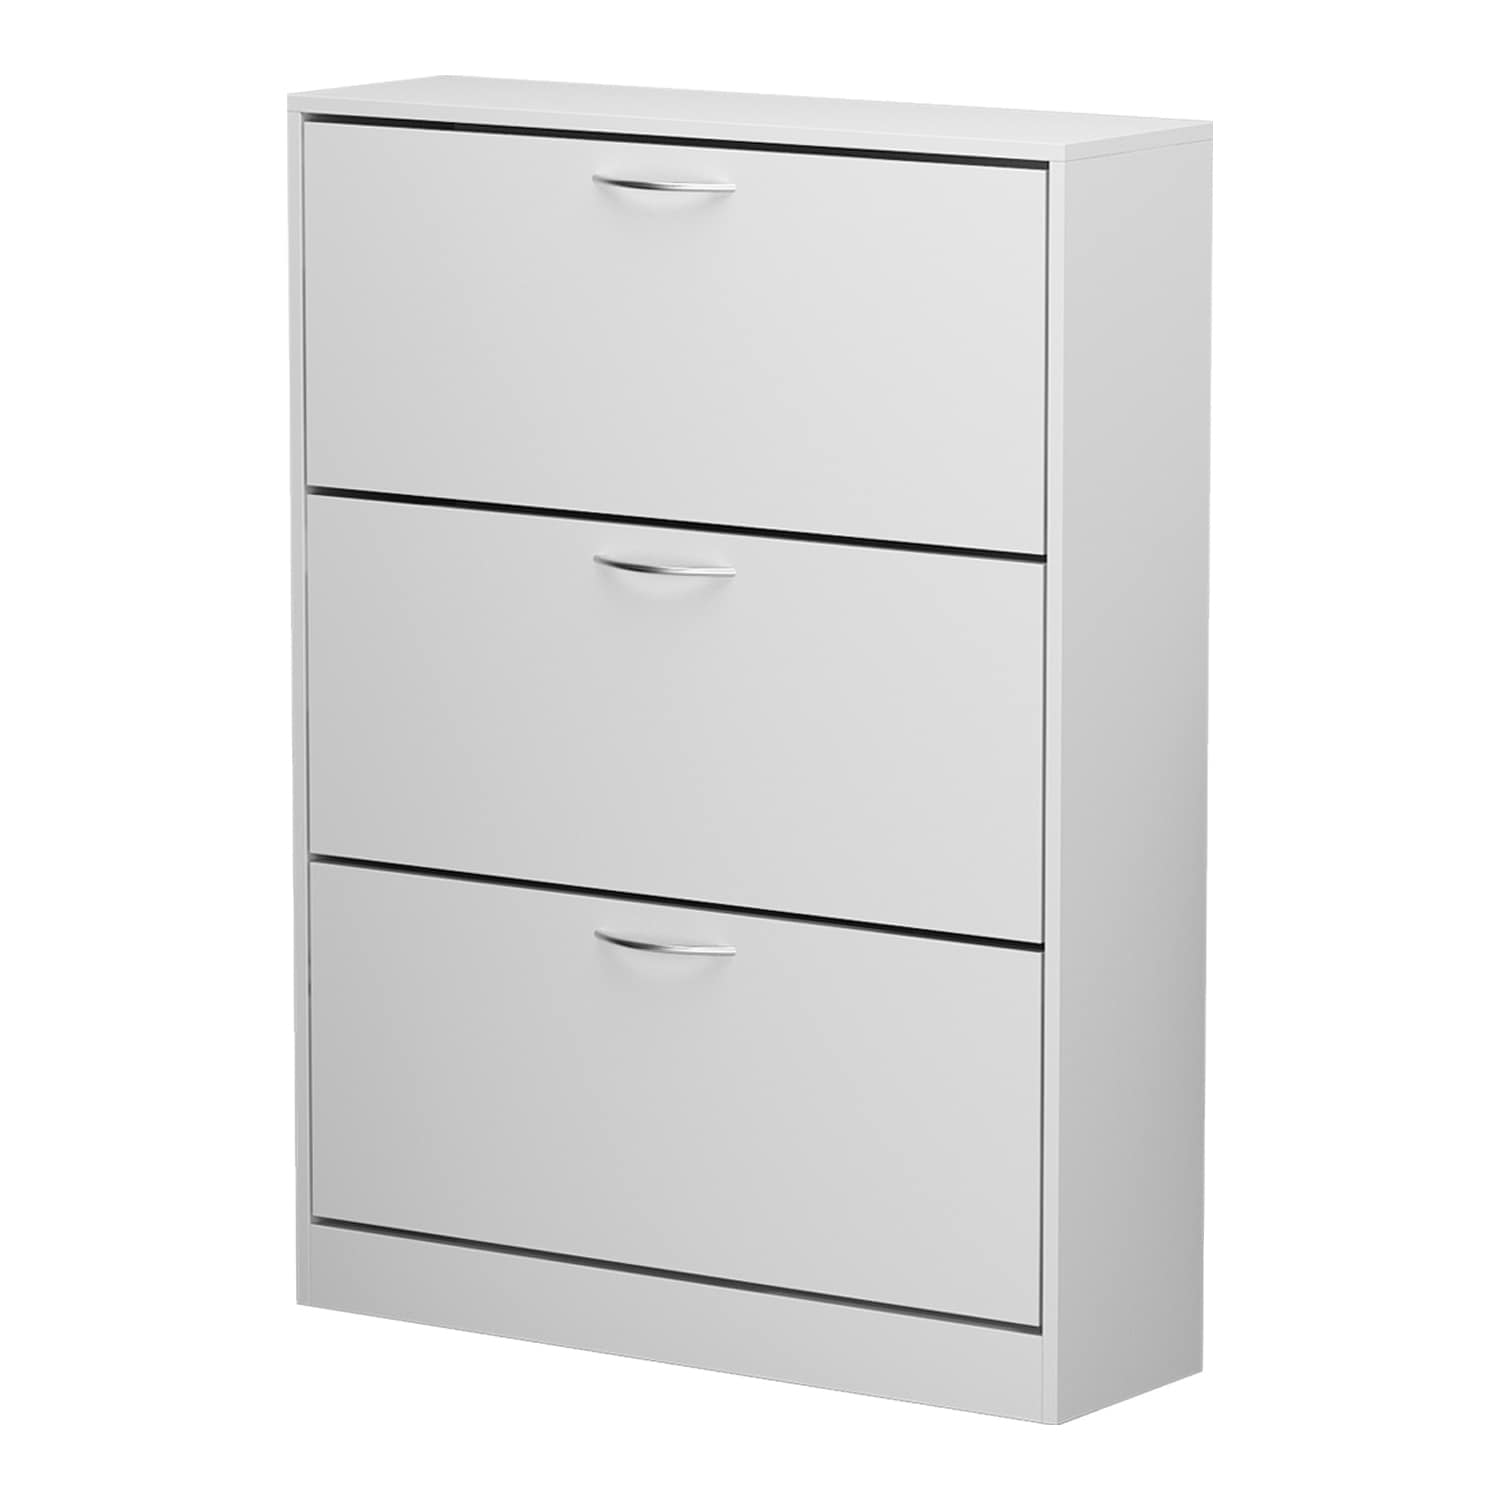 FUFU&GAGA 64 in. H x 21.7 in. W White Wood 4 Louver Drawers Shoe